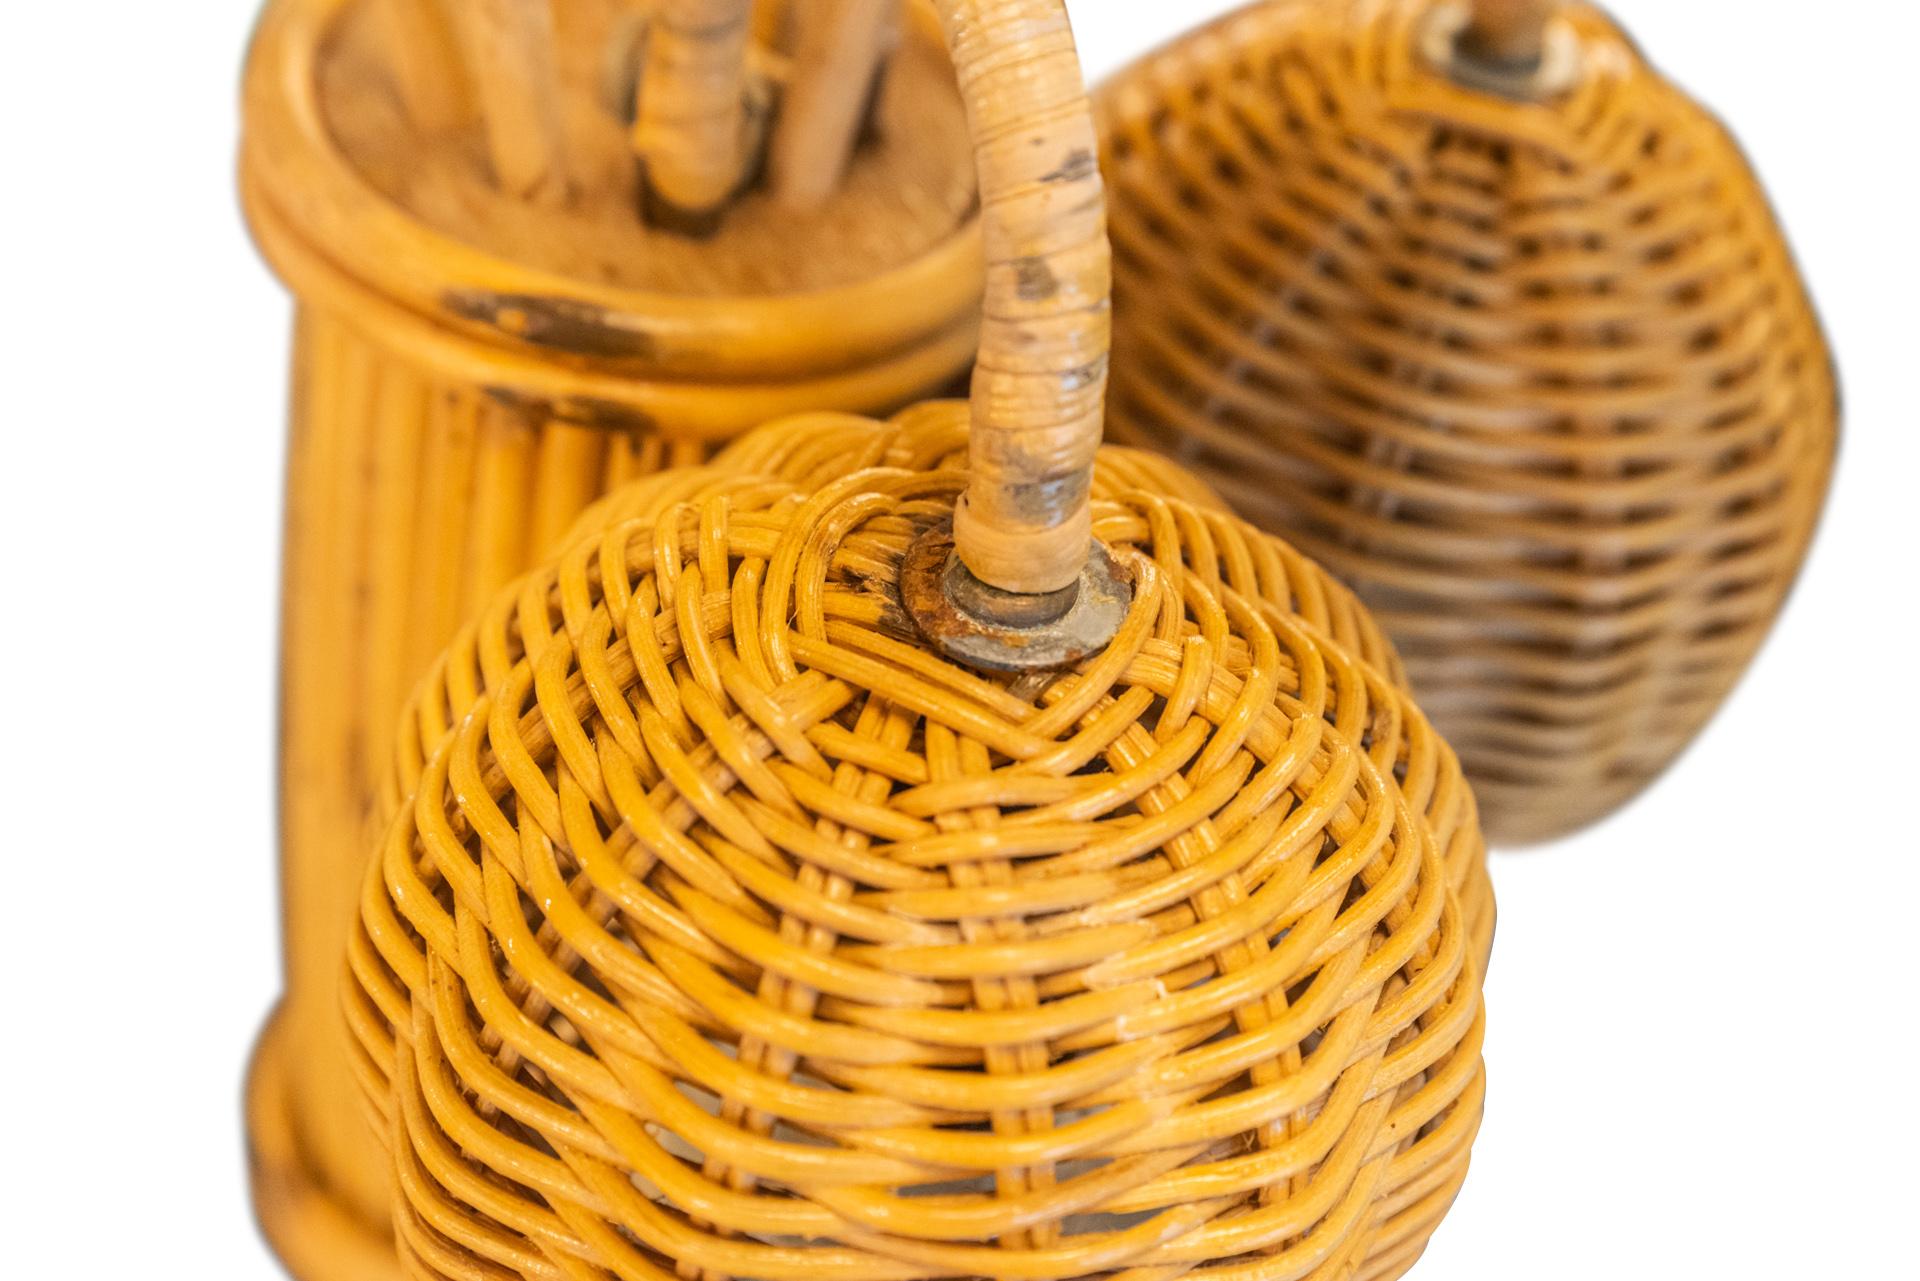 Pair of Coconut Tree Lamps, Rattan, circa 1960, Mexico For Sale 3